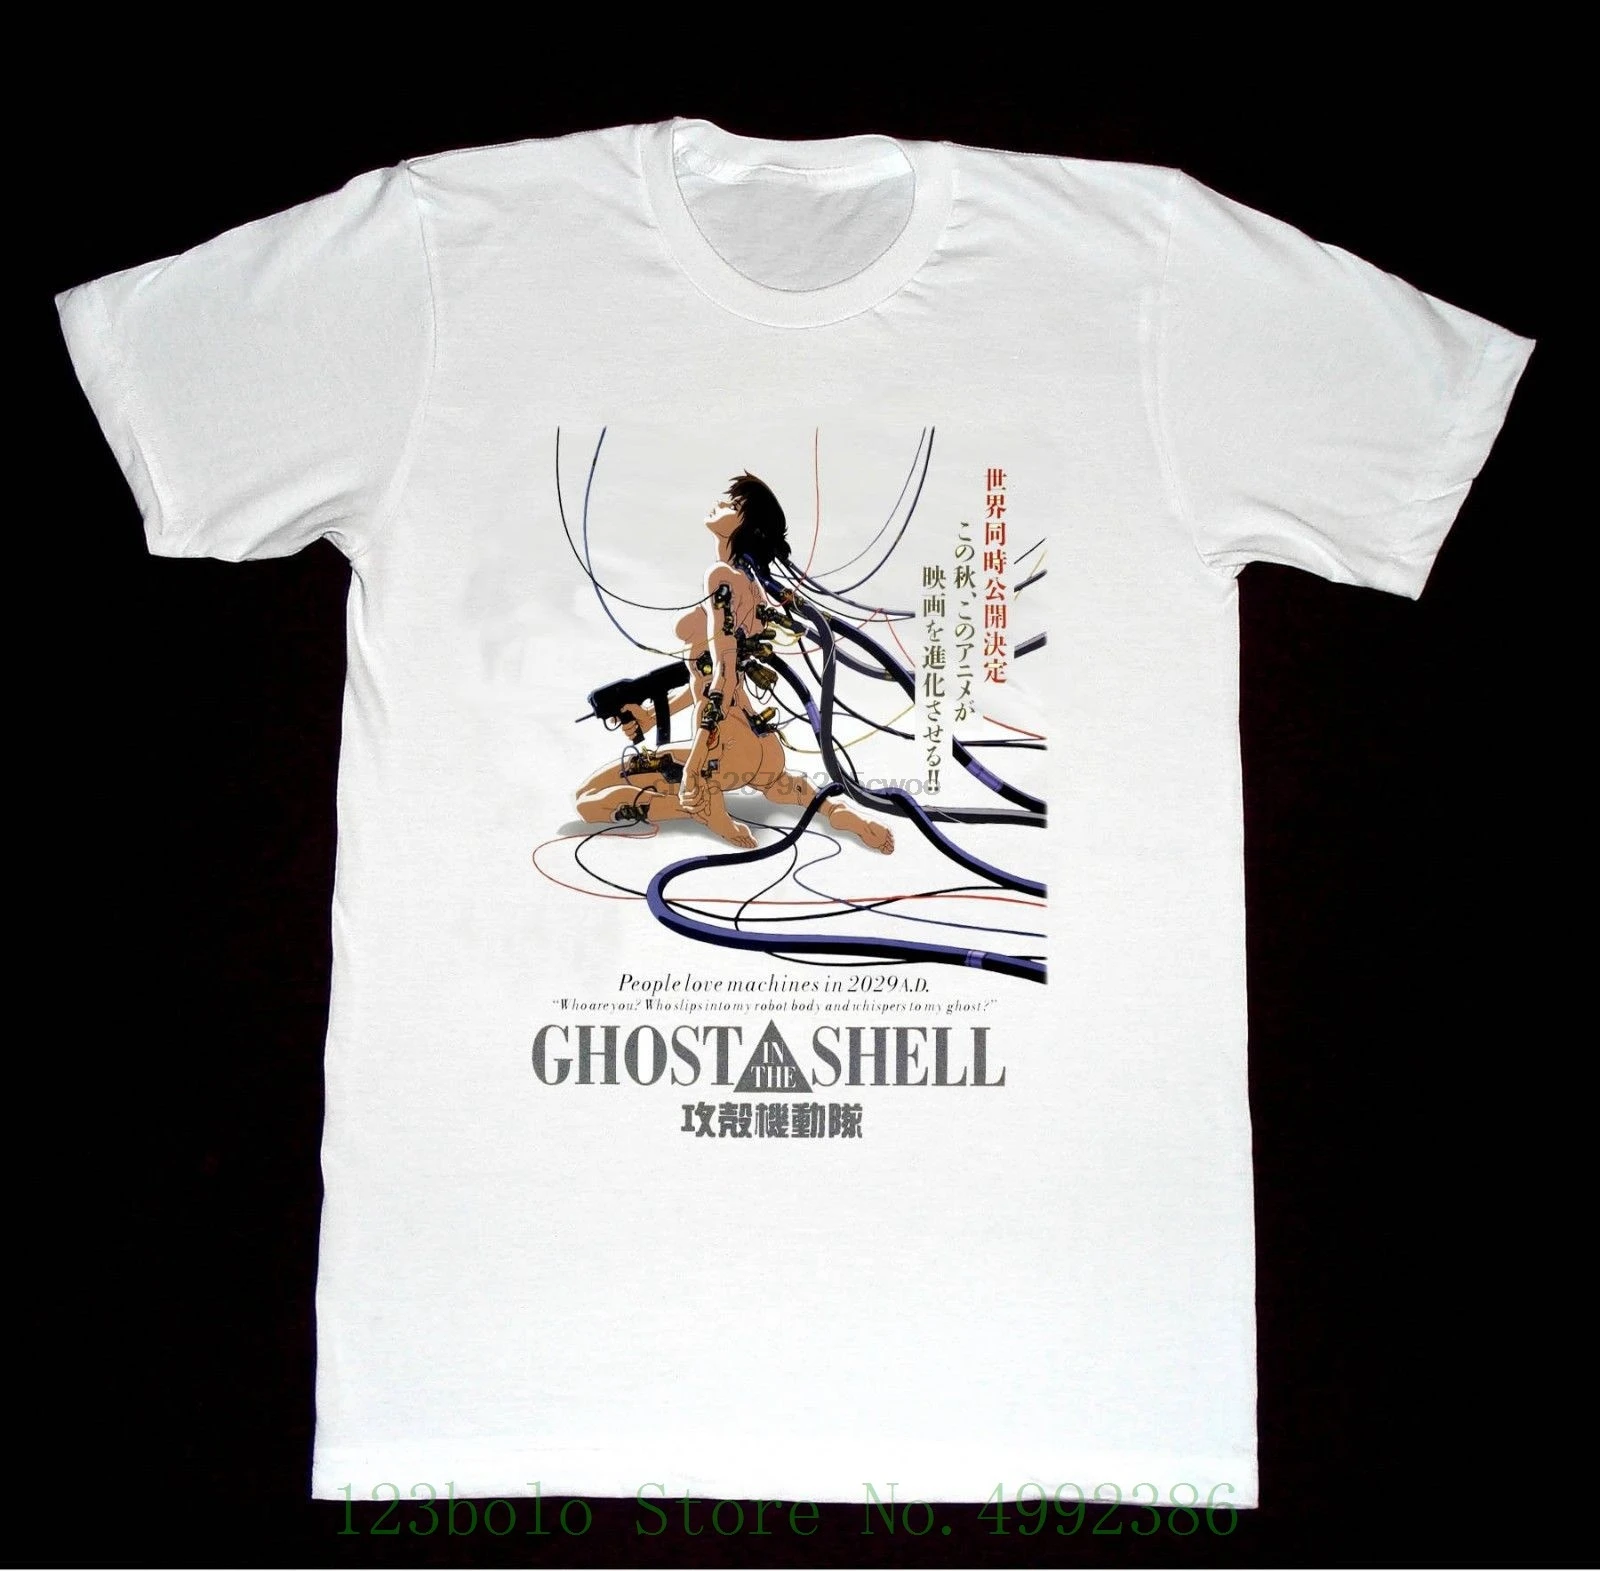 

Ghost In The Shell Tshirt F10 Shirt Anime Classic Vintage Japanese Akira Short Sleeve Cheap Sale Gift T Shirt